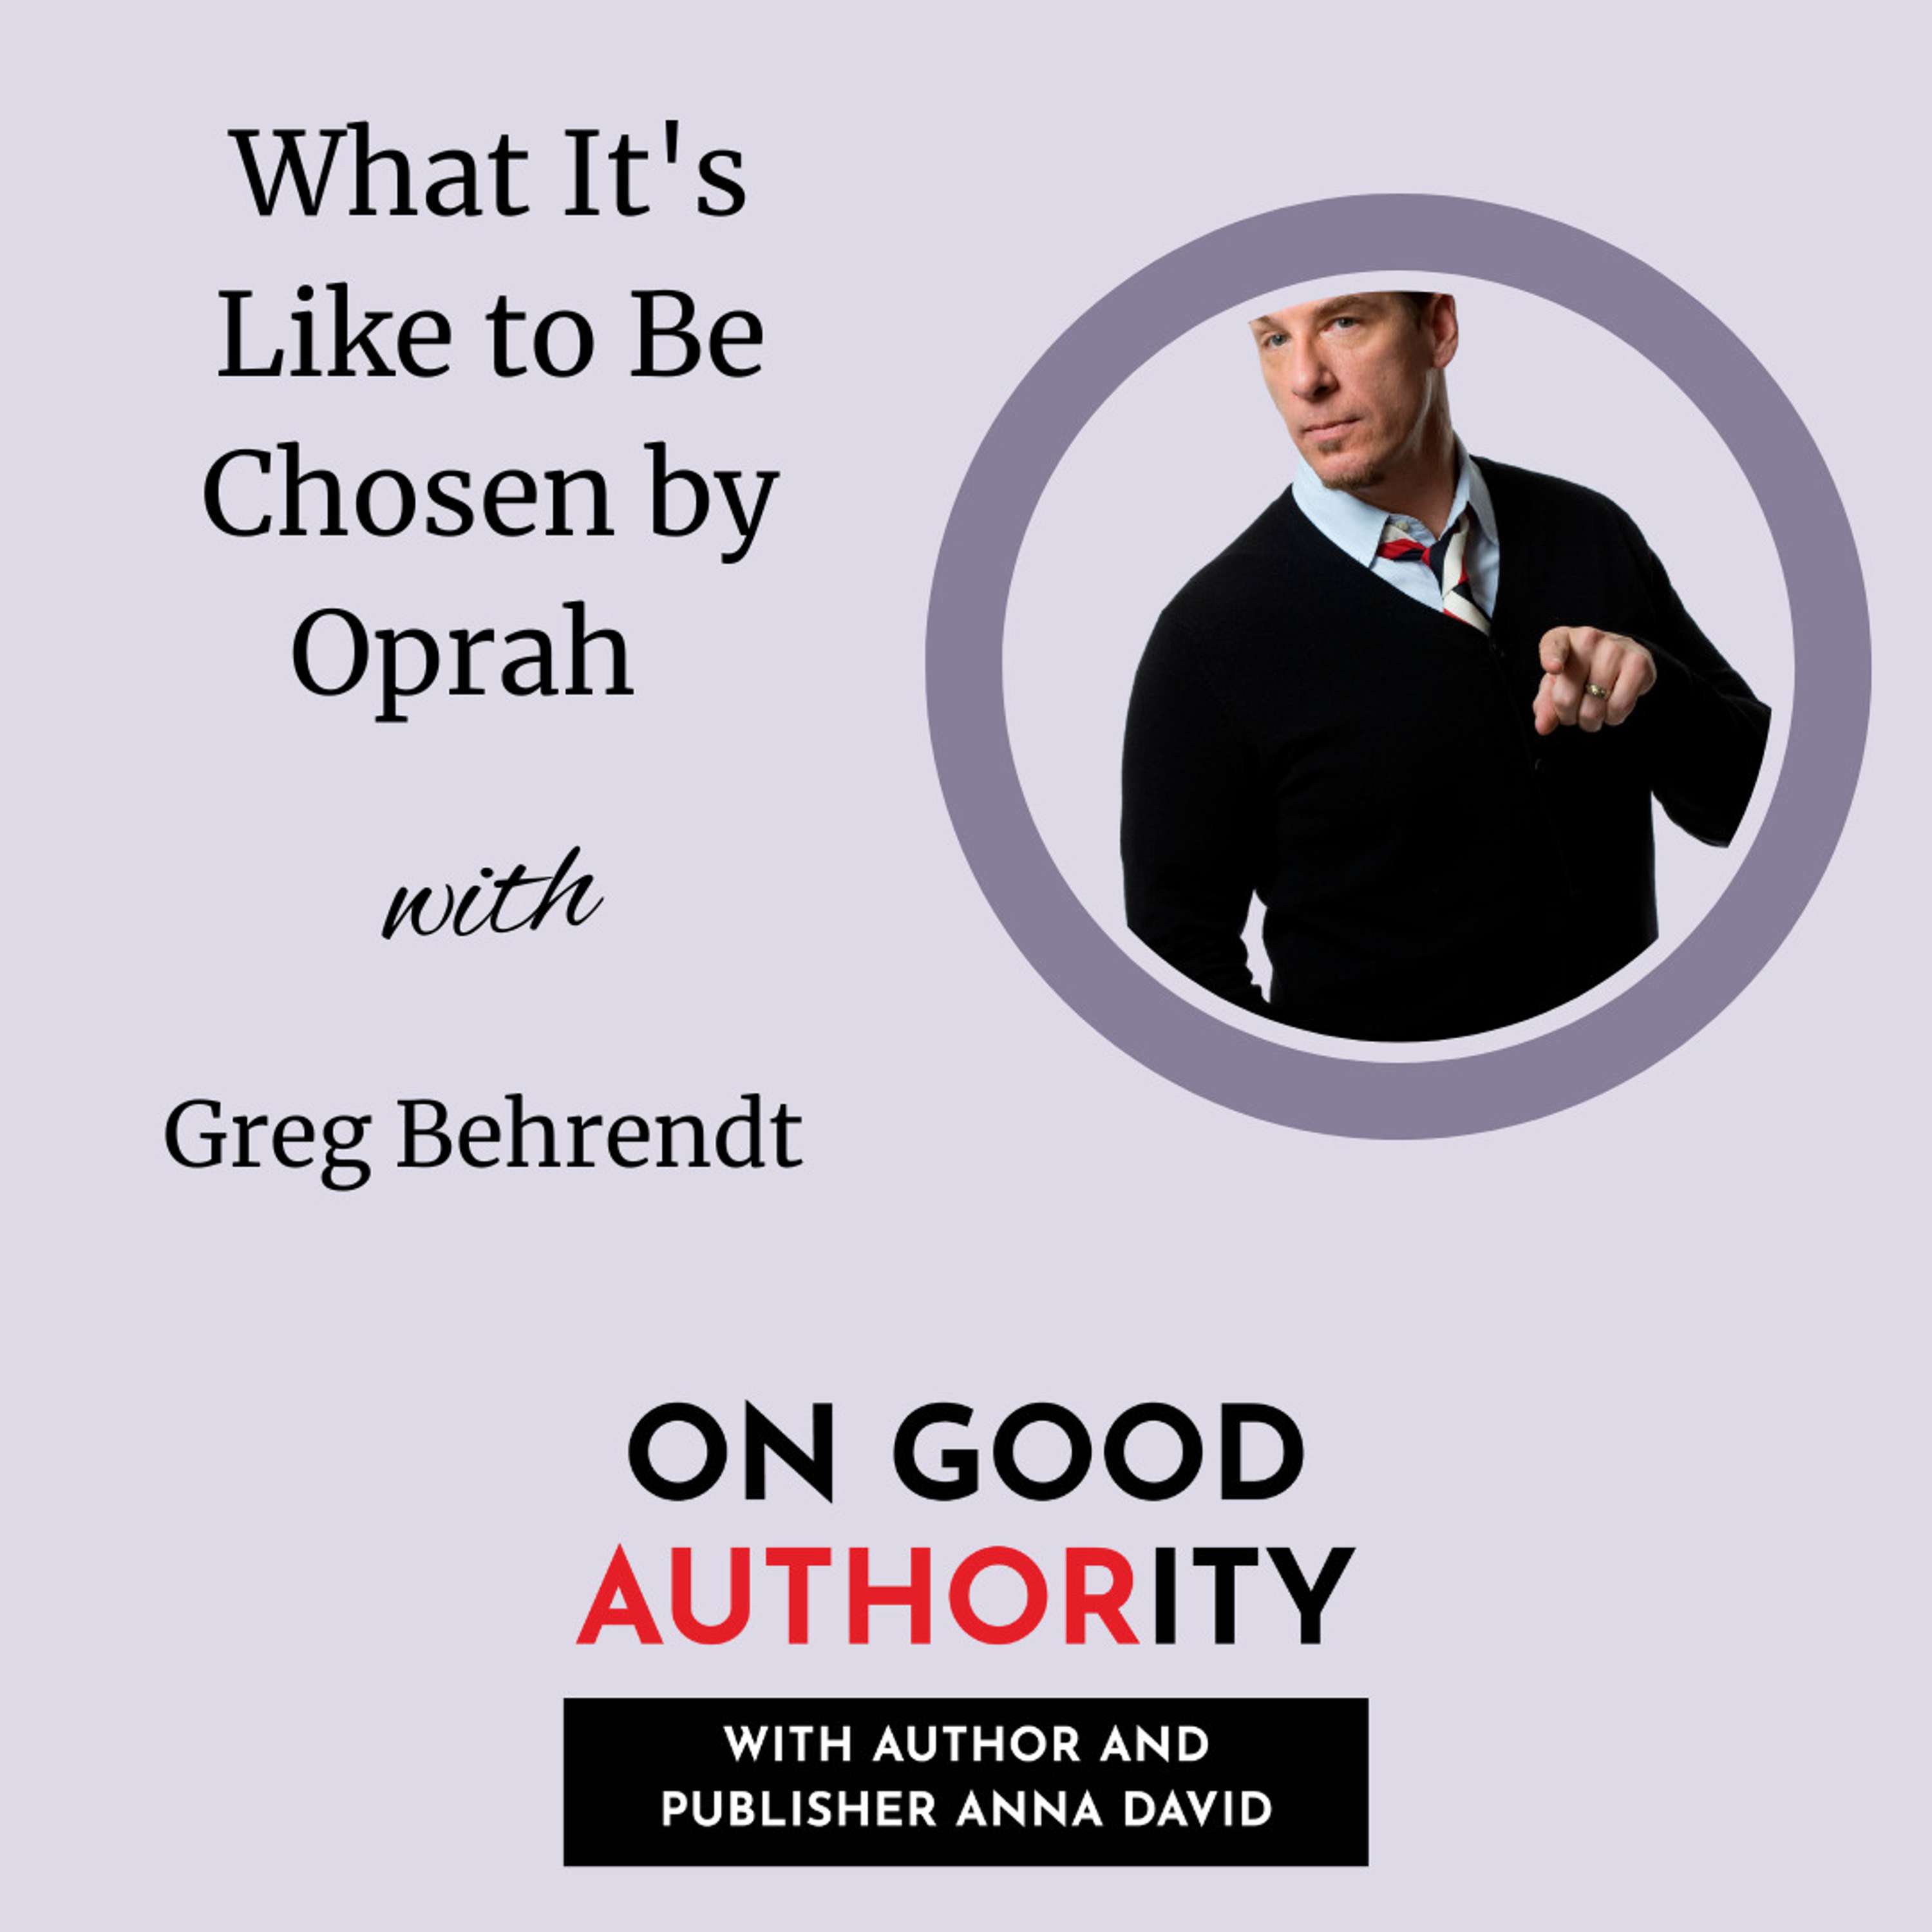 What It's Like to Be Chosen by Oprah with Greg Behrendt